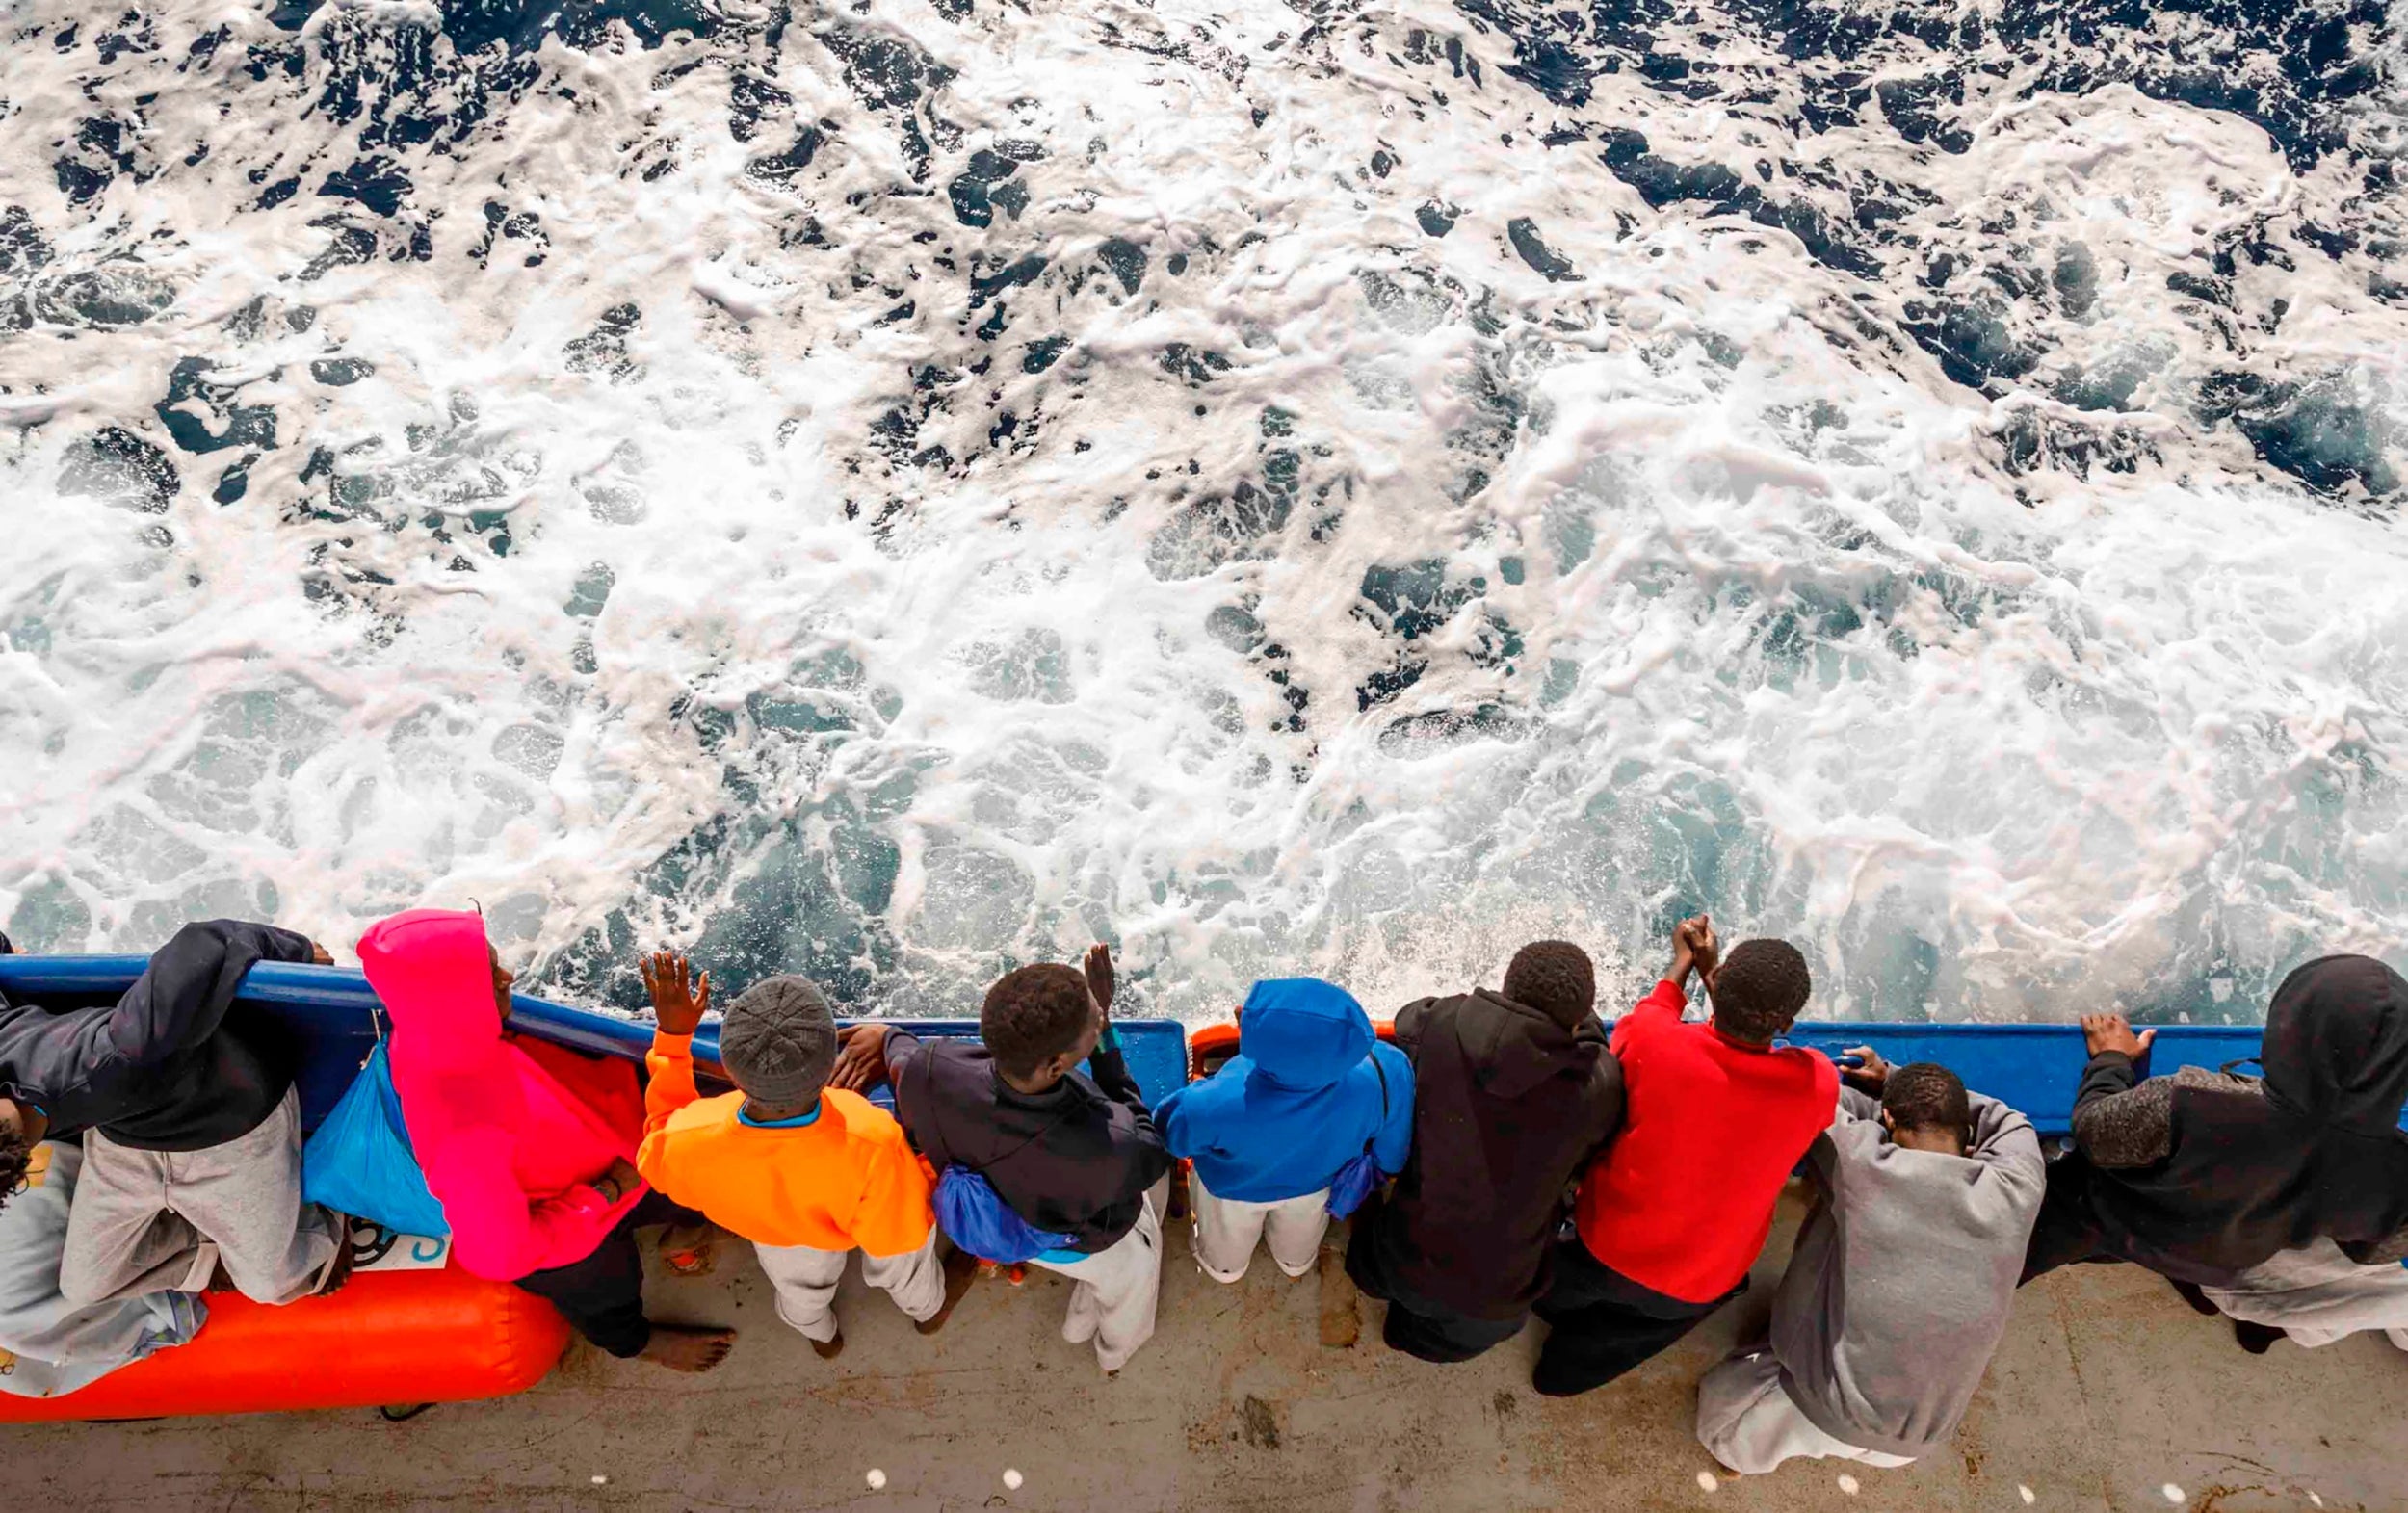 A group of migrants travel on board the Spanish NGO Maydayterraneo's Aita Mari rescue boat on February 10, 2020 in a separate incident off the Libyan coast. Libya is often used as a jumping off point for entry into Europe via Italy and Malta.